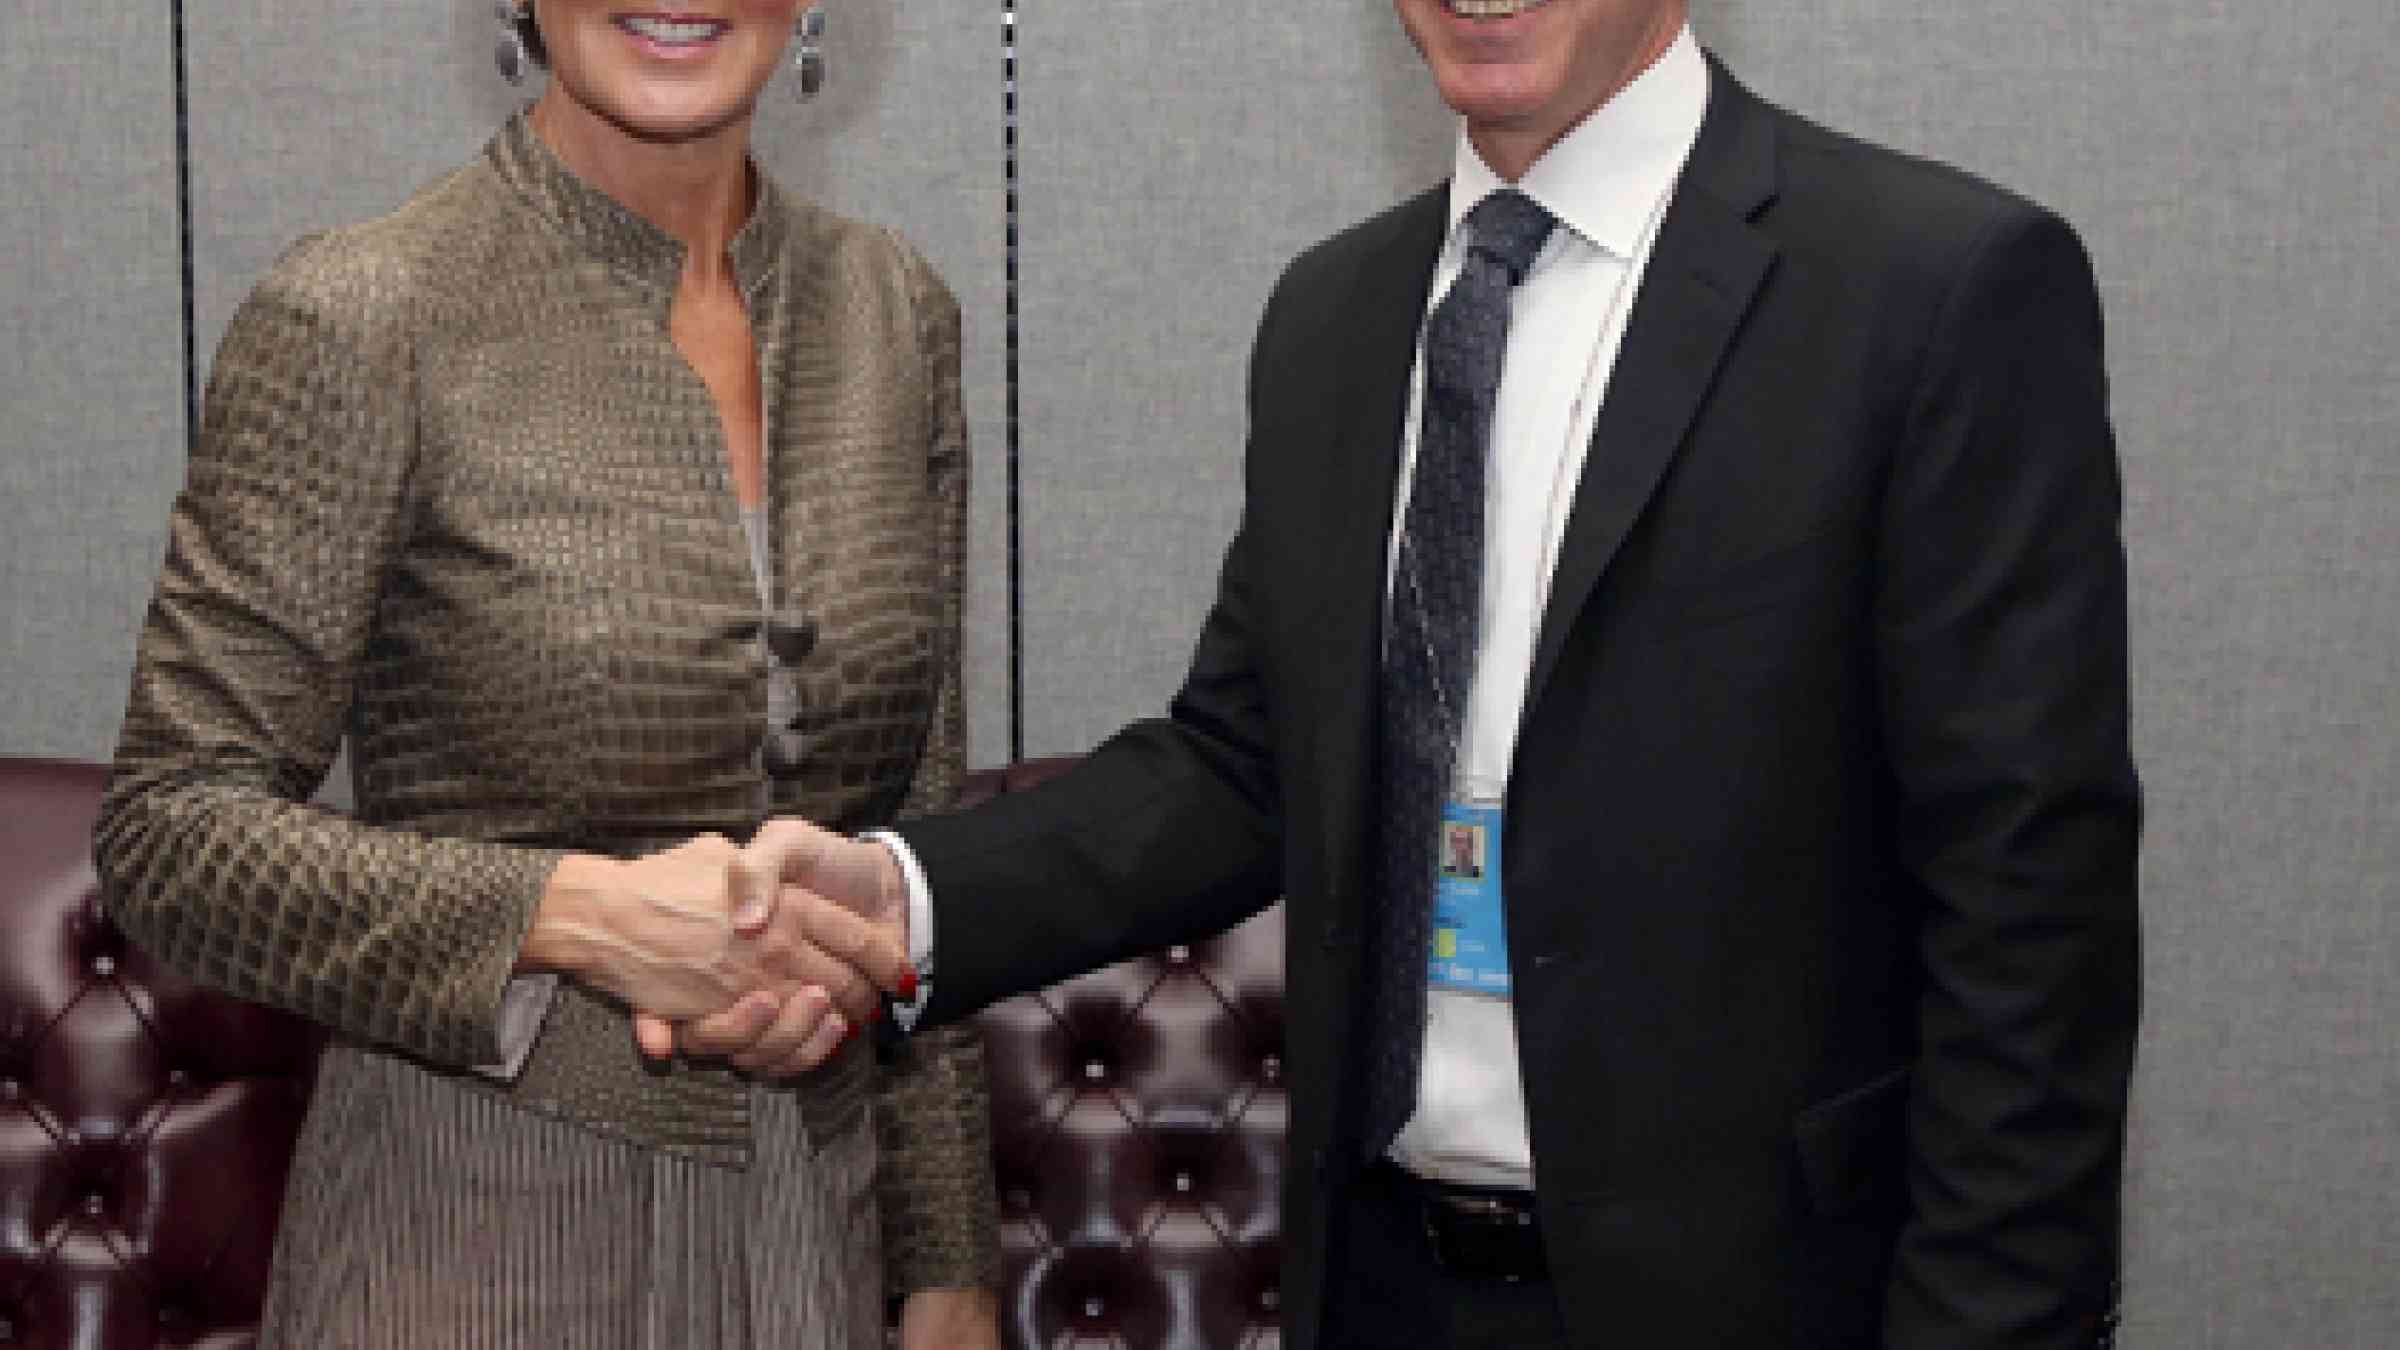 Mr. Robert Glasser, the UN Secretary-General’s Special Representative for Disaster Risk Reduction (right) met with Ms. Julie Bishop, Australian Minister for Foreign Affairs, on the sidelines of the UN Summit on Refugees and Migrants